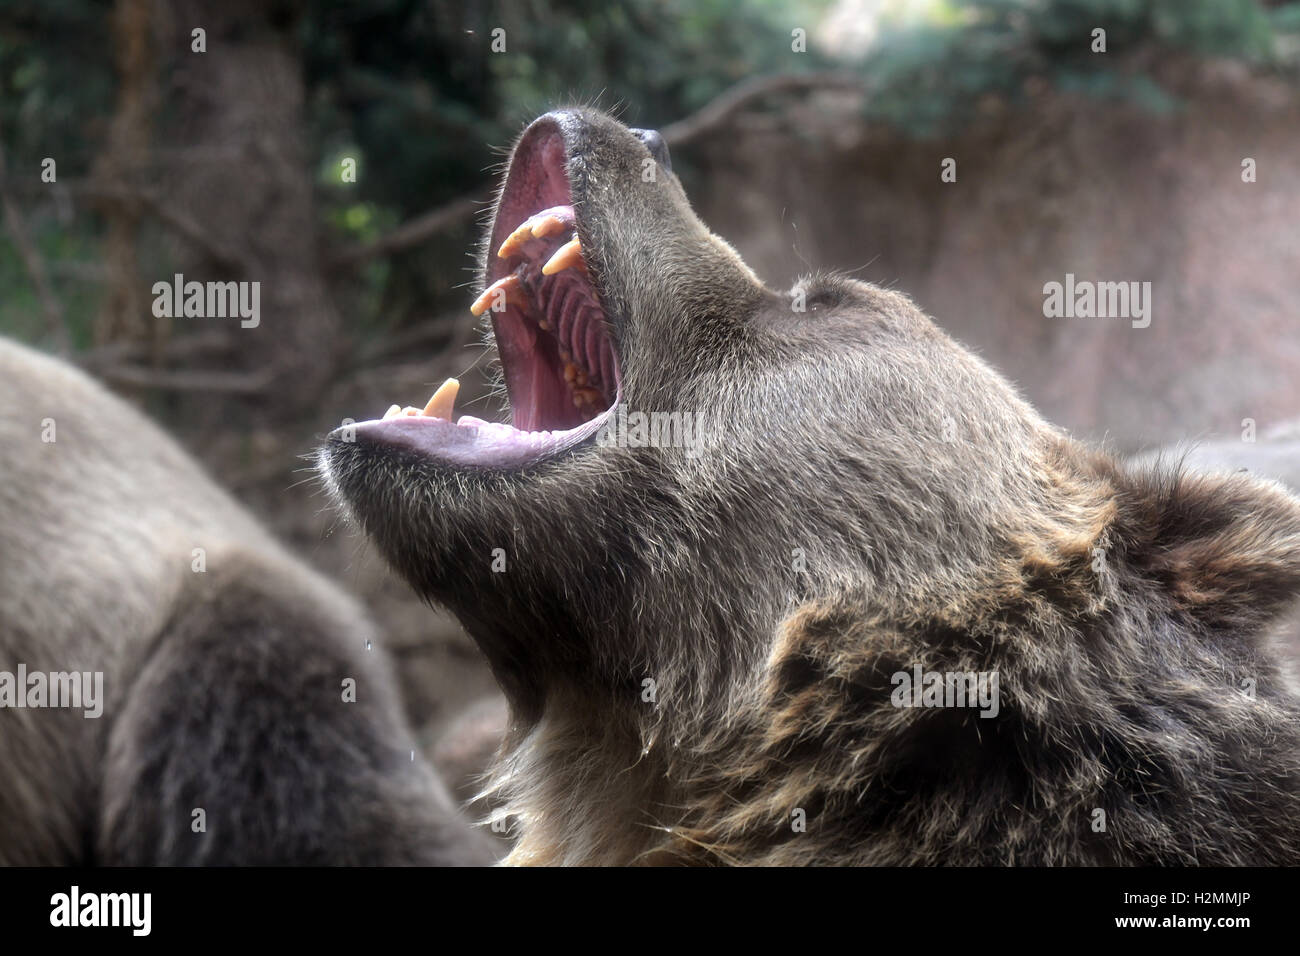 Head of grizzly bear growling Stock Photo